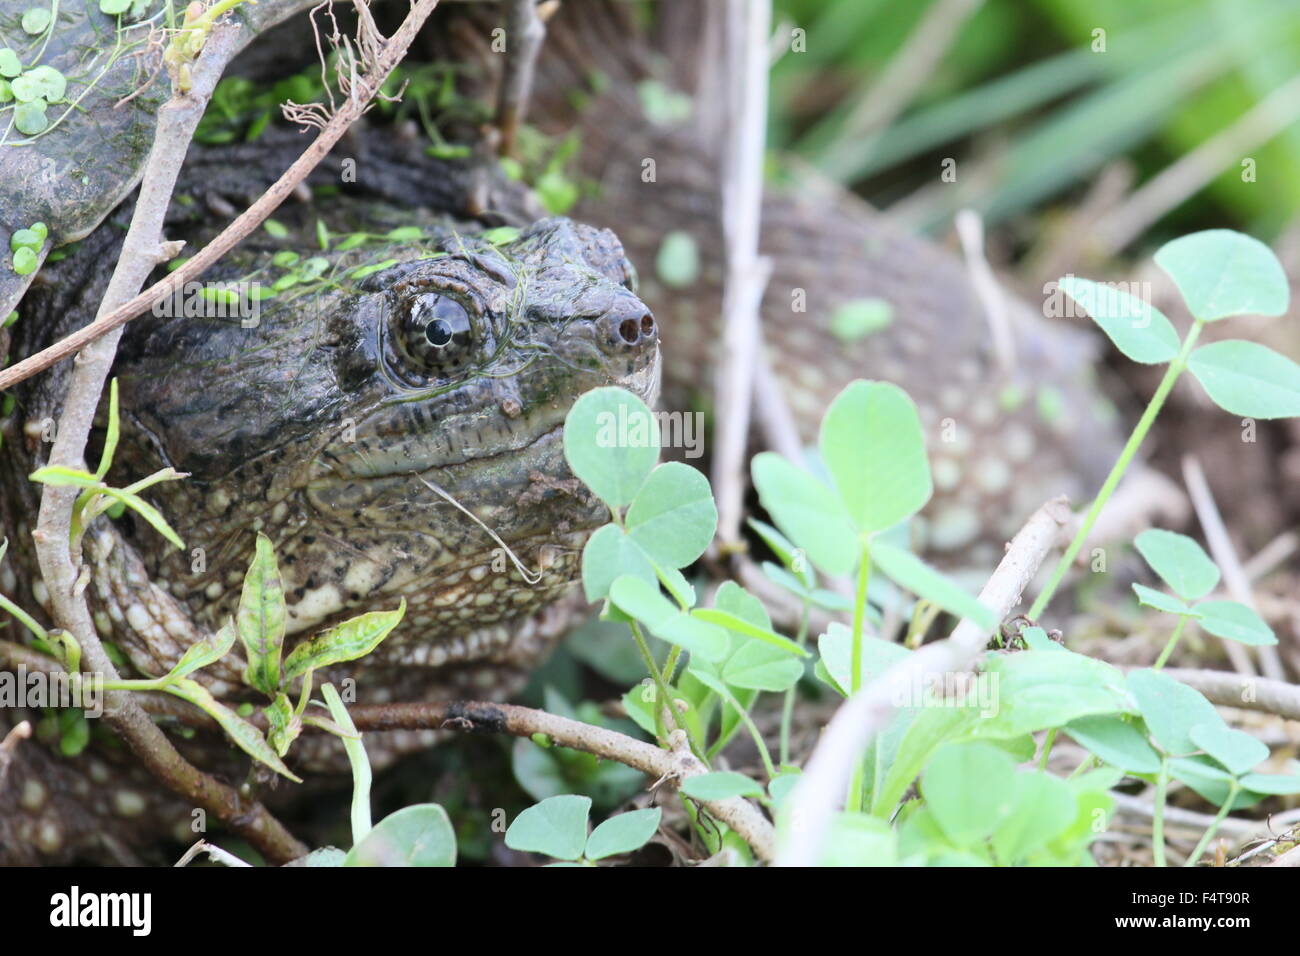 Snapping turtle among twigs and clover. Stock Photo